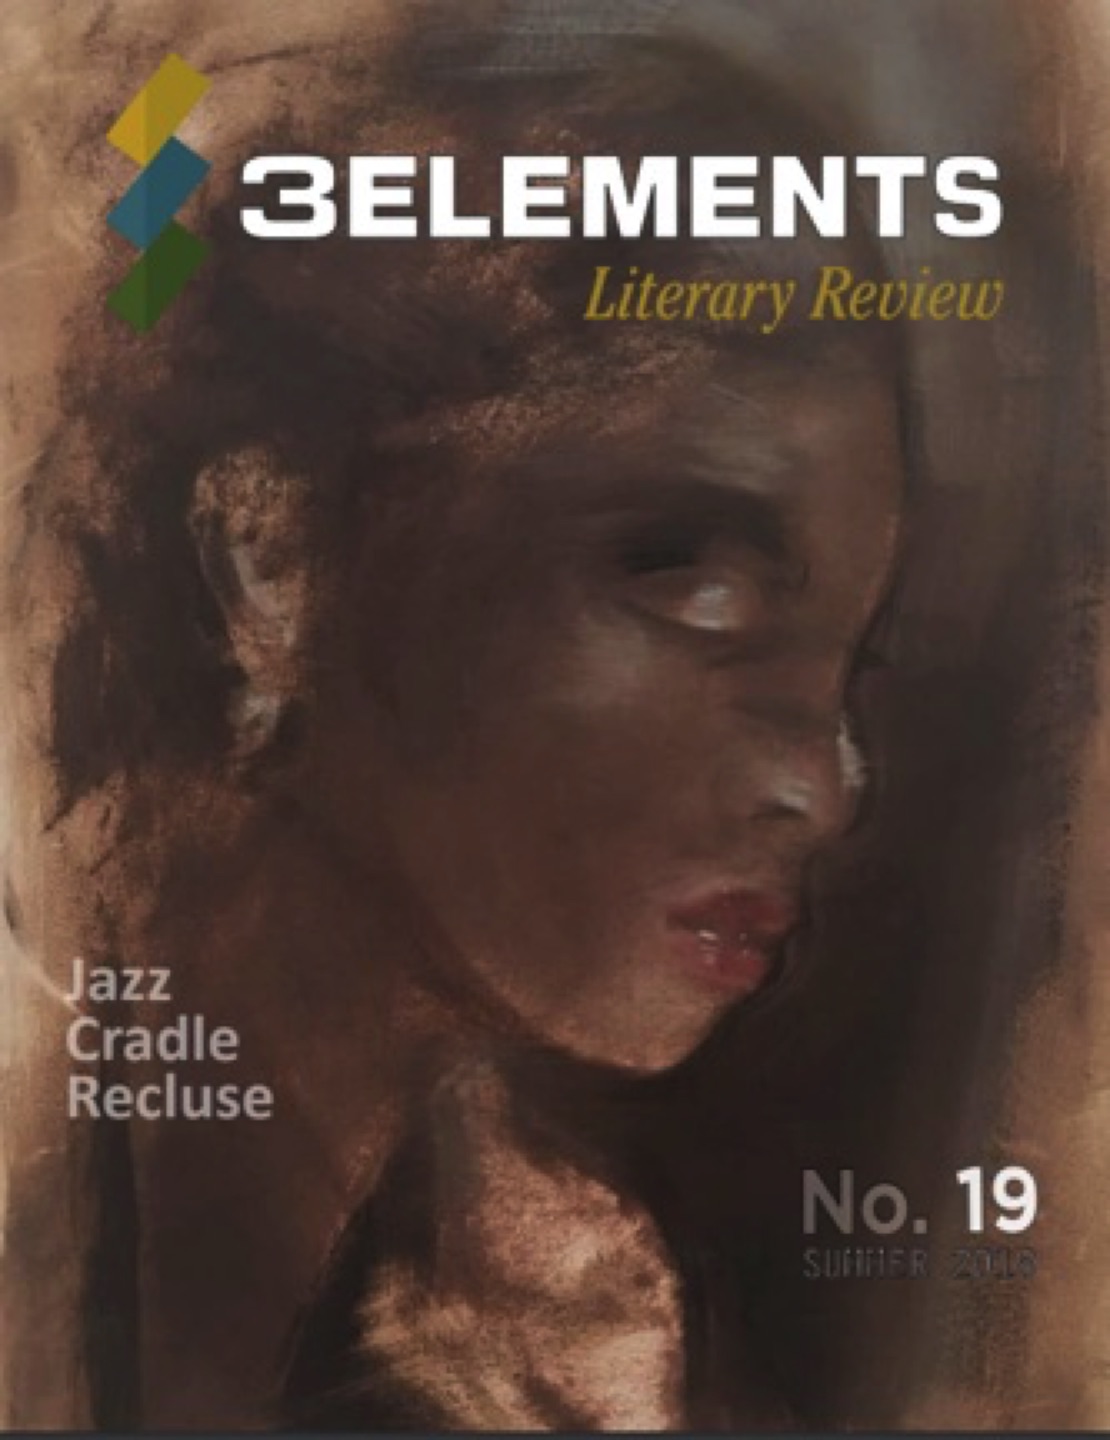 Gregg Chadwick
Jazz Life (Central Avenue)
30”x22” ink on paper 2018
On the Cover of 3Elements Literary Review, Issue No. 19